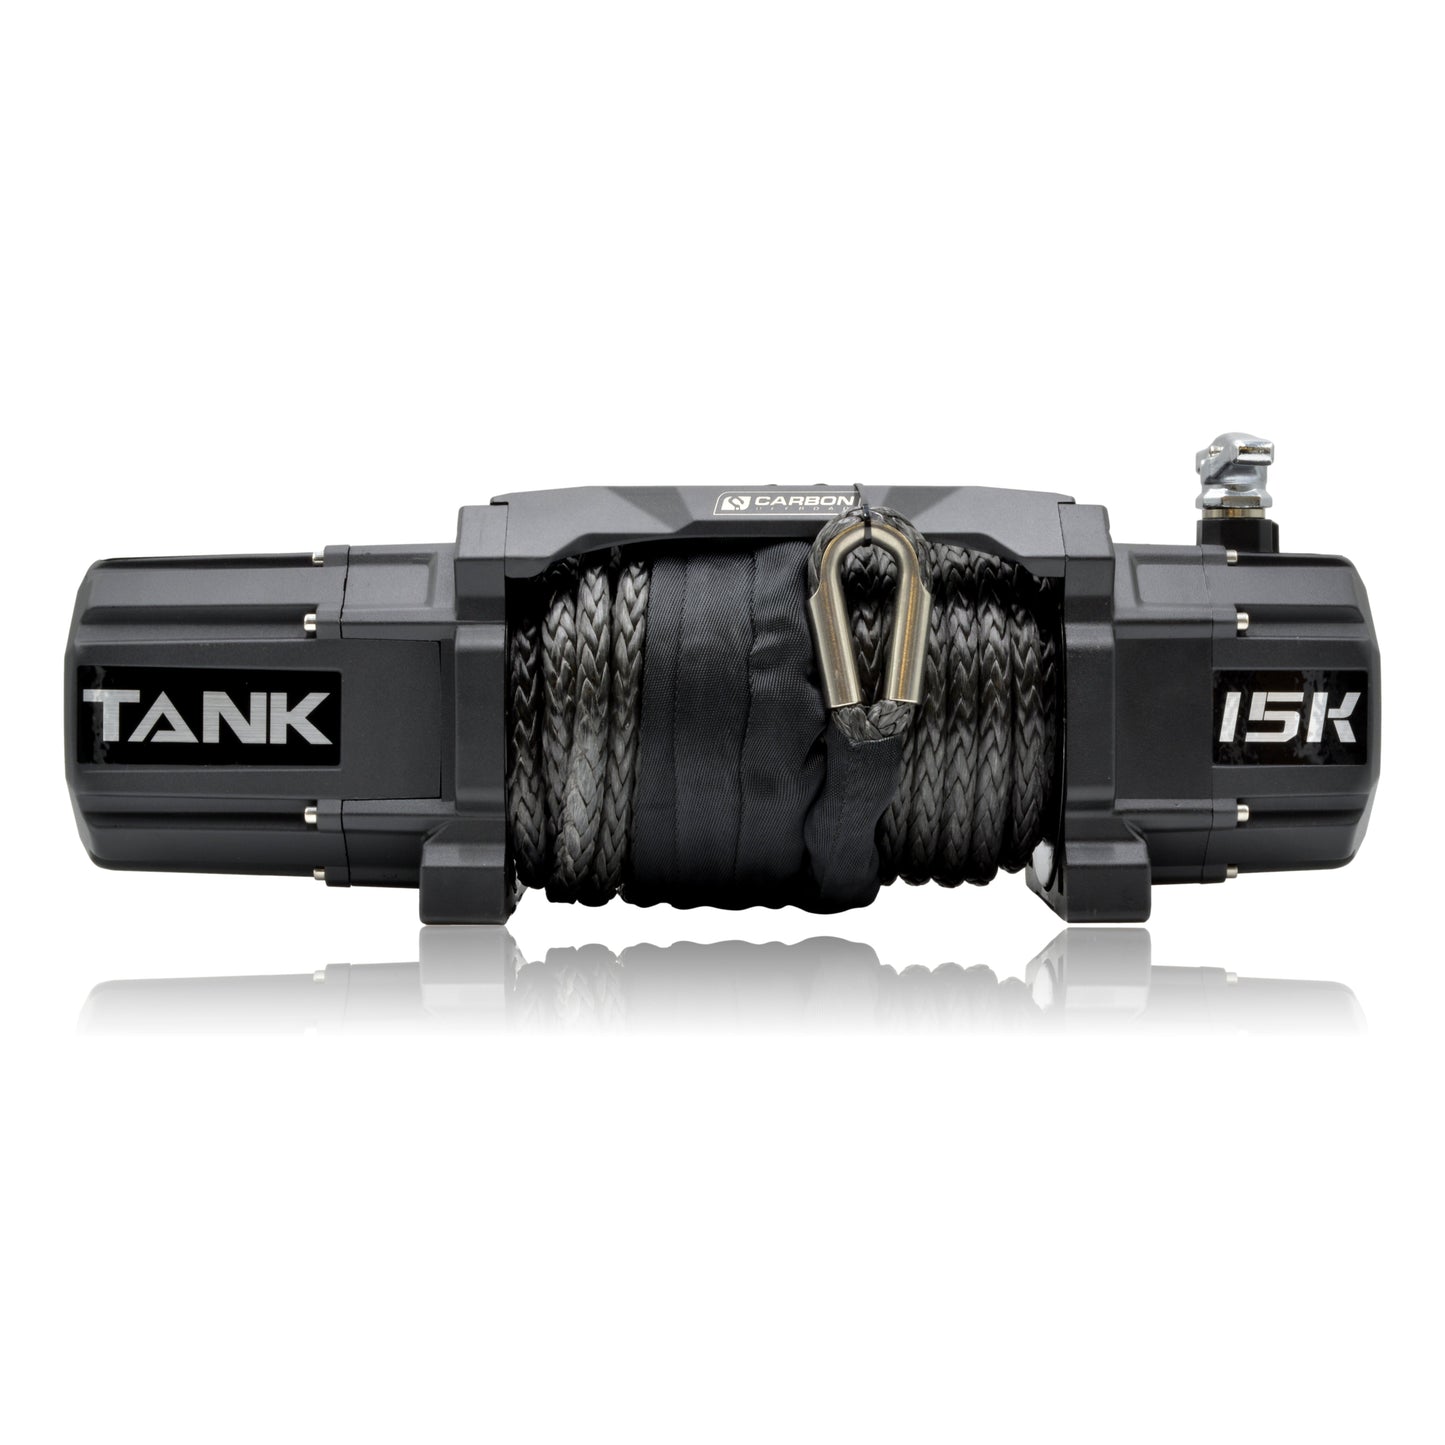 Carbon Tank 12000lb 4x4 Winch Kit IP68 12V and Recovery Combo Deal - CW-TK12-COMBO2 4